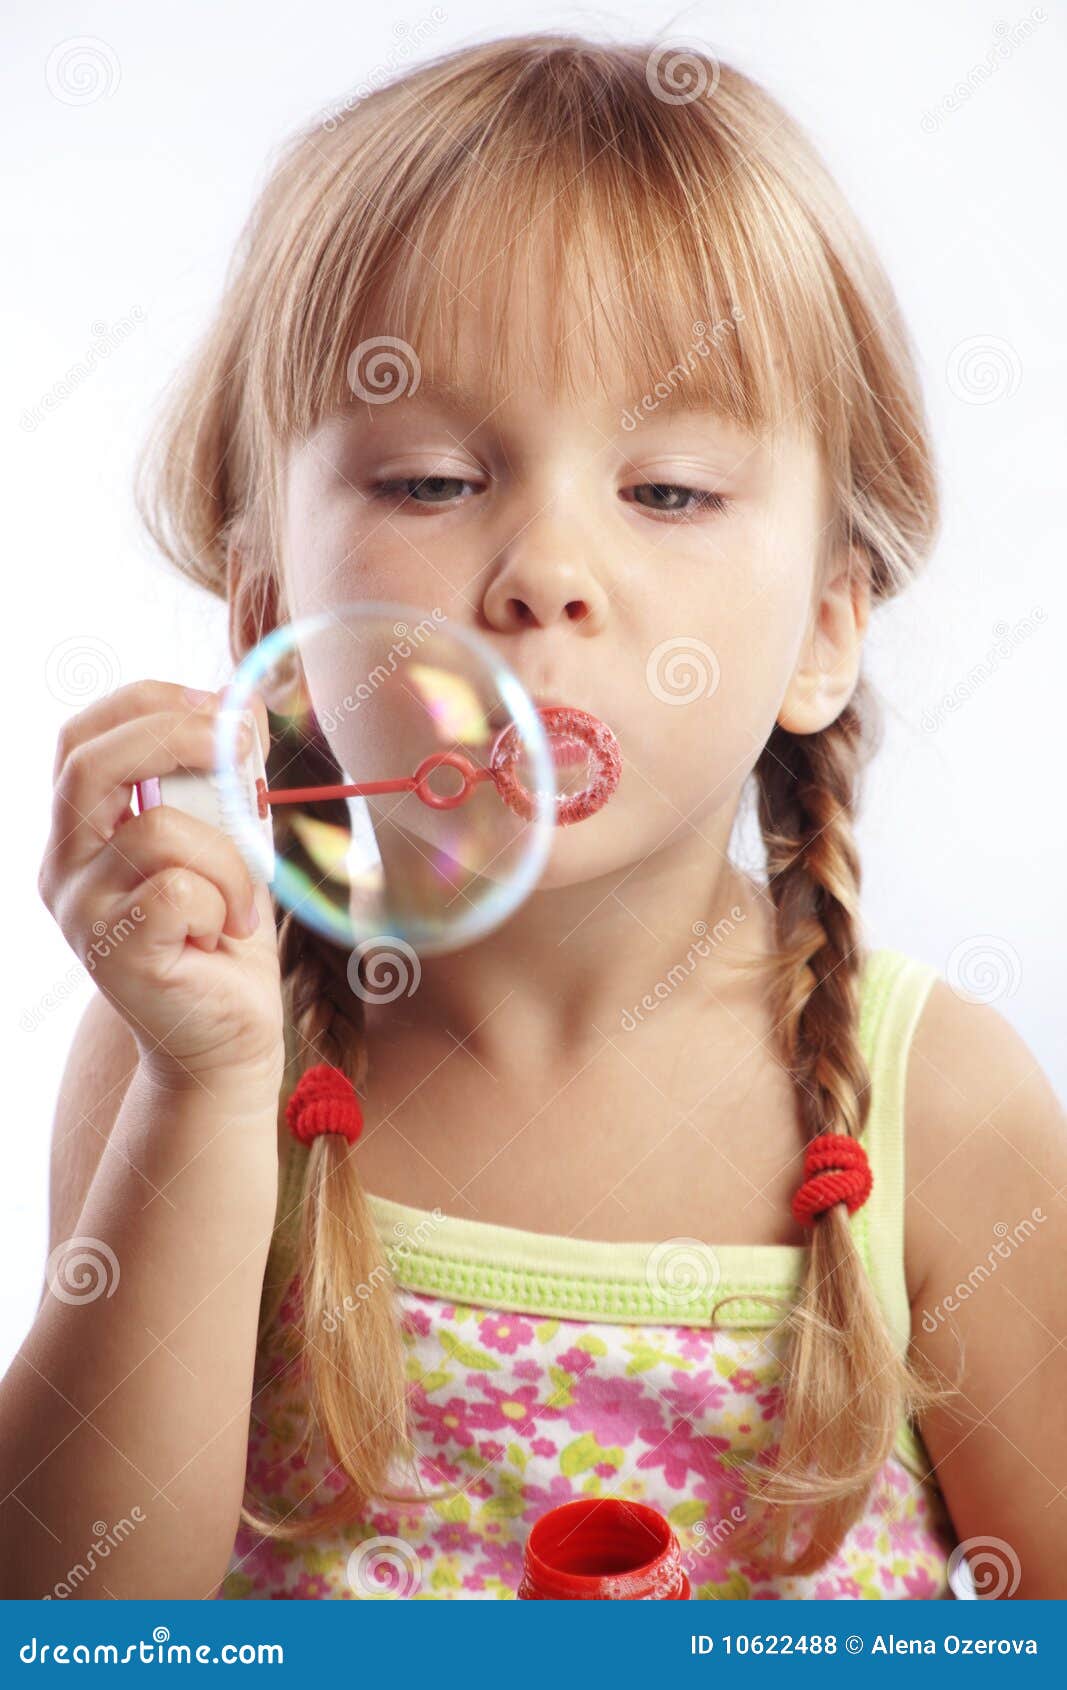 Little Girl Blowing Bubbles Stock Photo - Image: 10622488